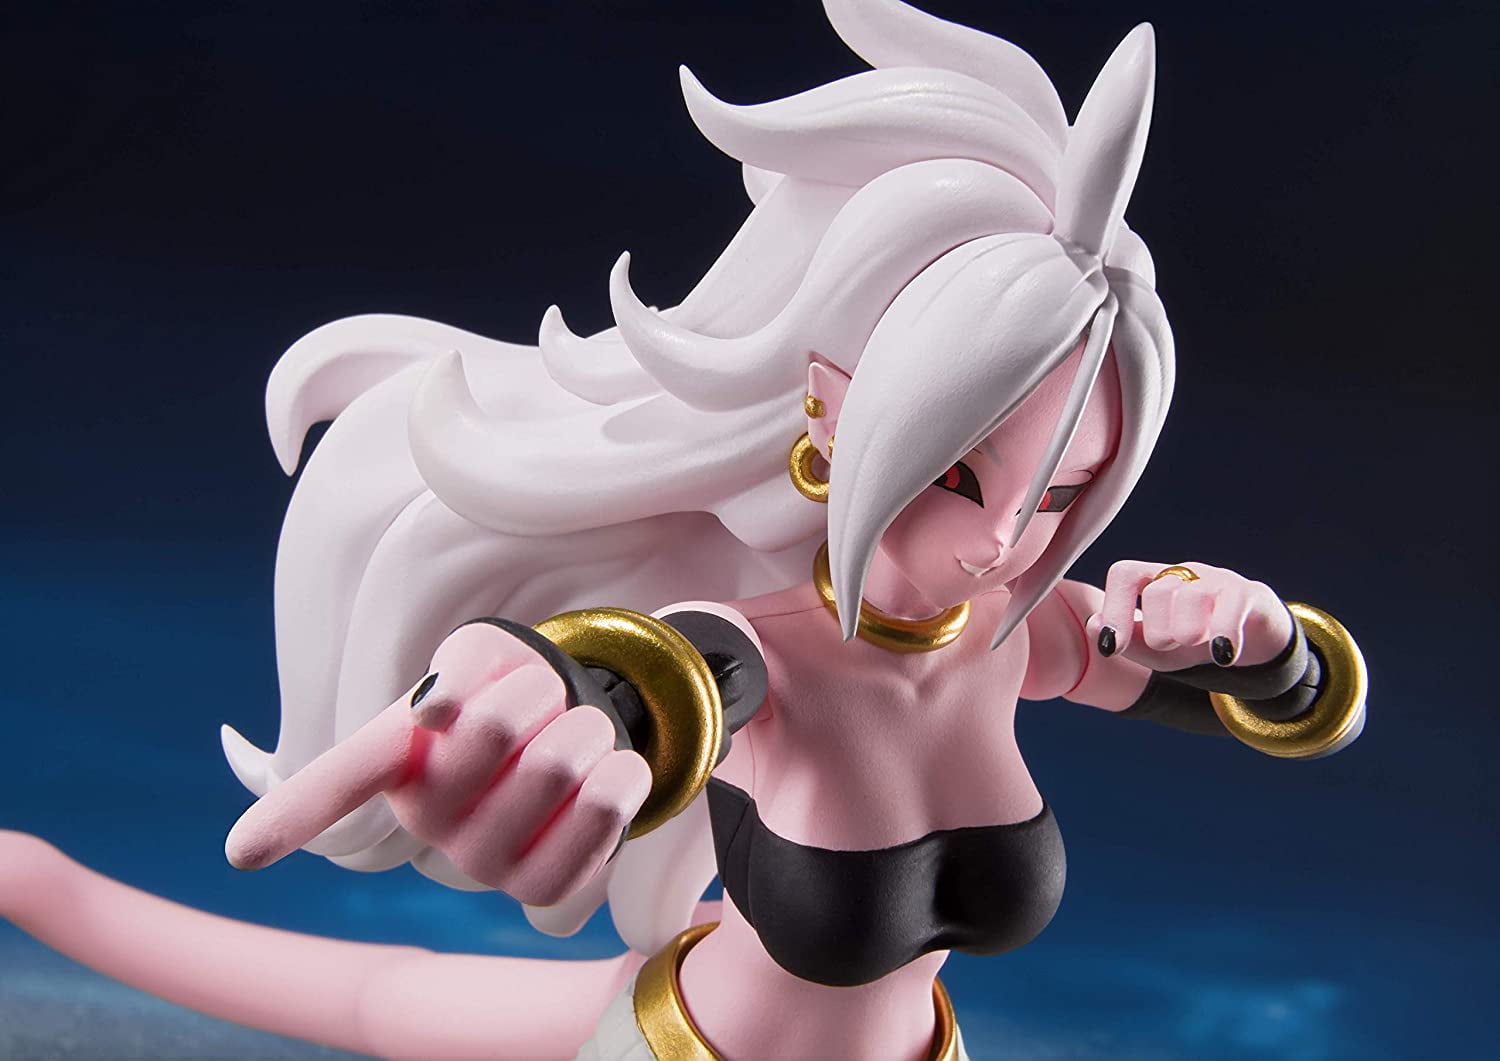 Anime Dragon Ball Z Gals Android NO 21 Majin Buu Lady Ver. PVC Action  Figure Manga Statue Collectible Model Toys Doll Gifts 22CM